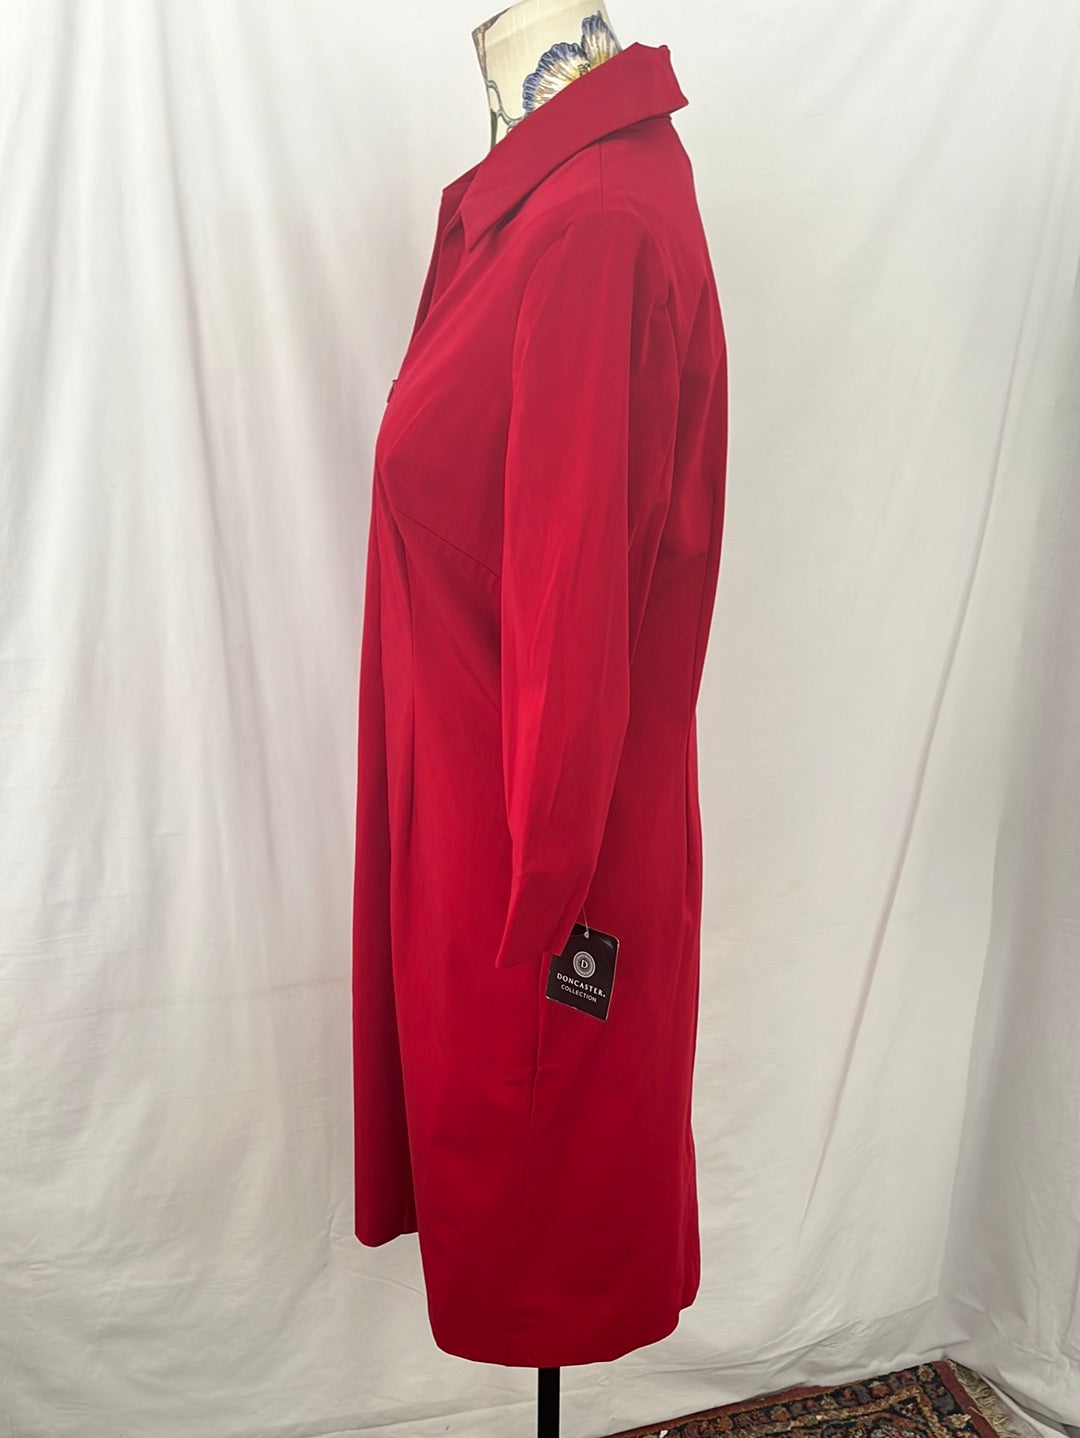 VTG / NWT -- Doncaster Collection red Collared Shift Dress -- 12